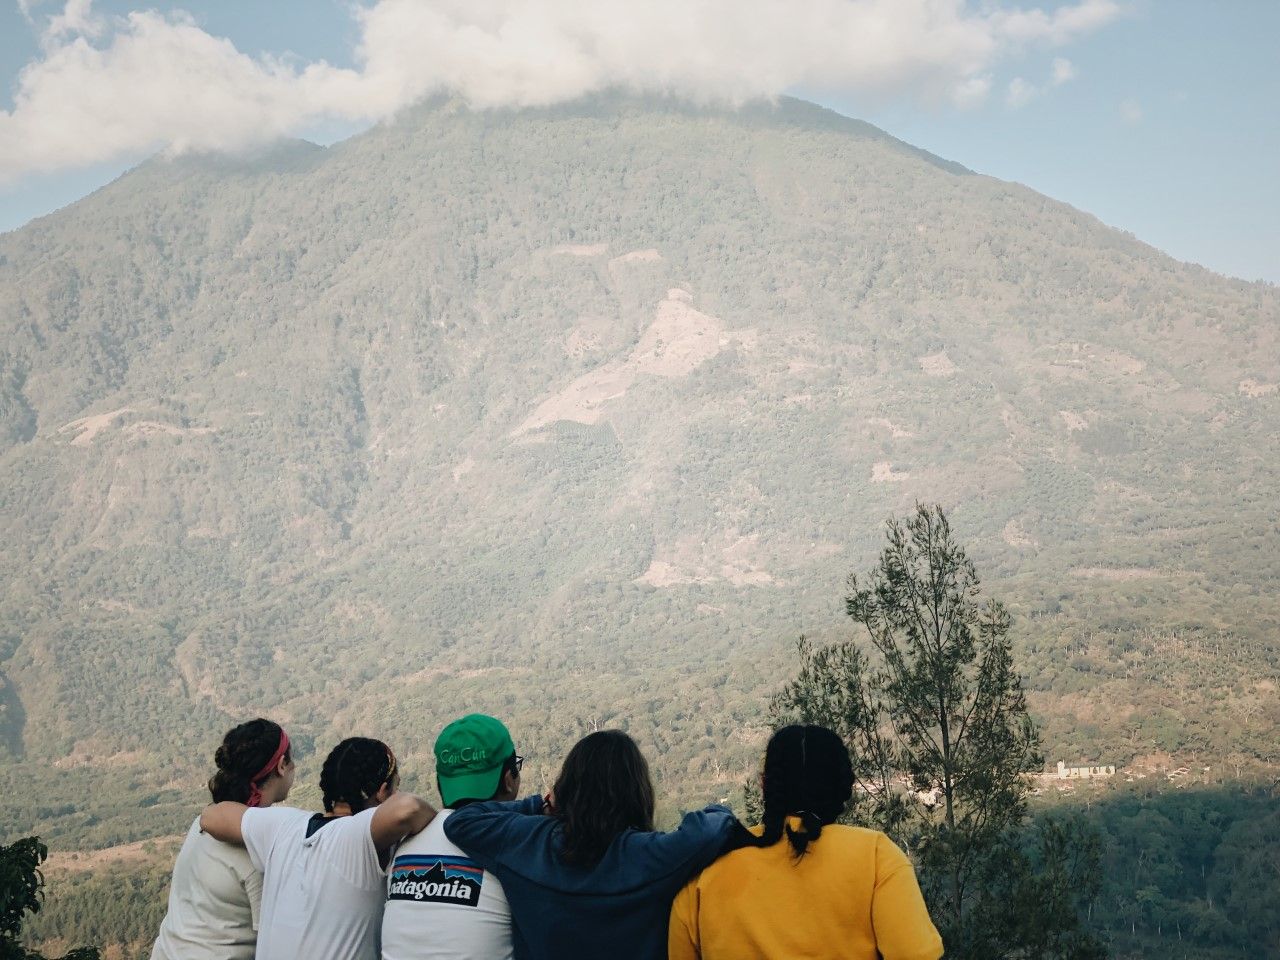 Cabrini students taking in the landscape surrounding San Lucas Tolimán. Photo by Ang Capozzi.